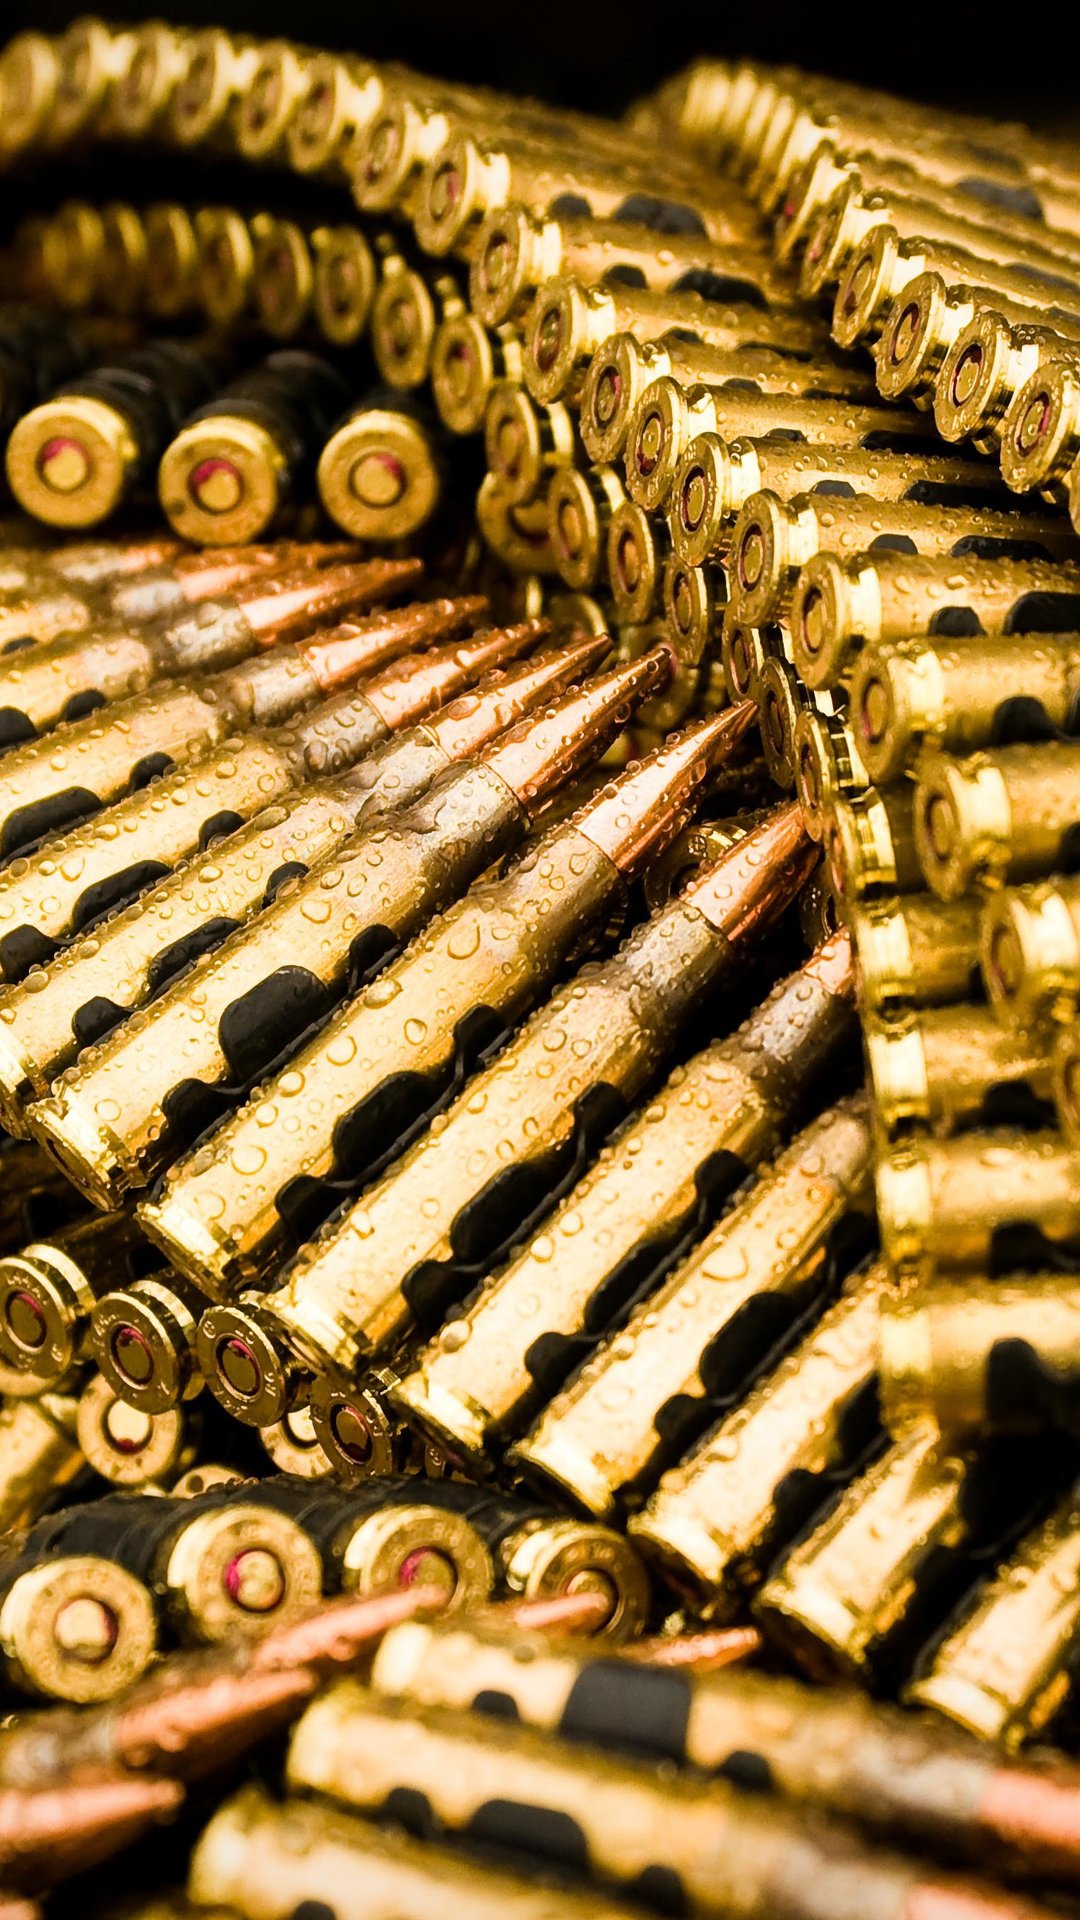 Bullets htc one wallpaper, free and easy to download